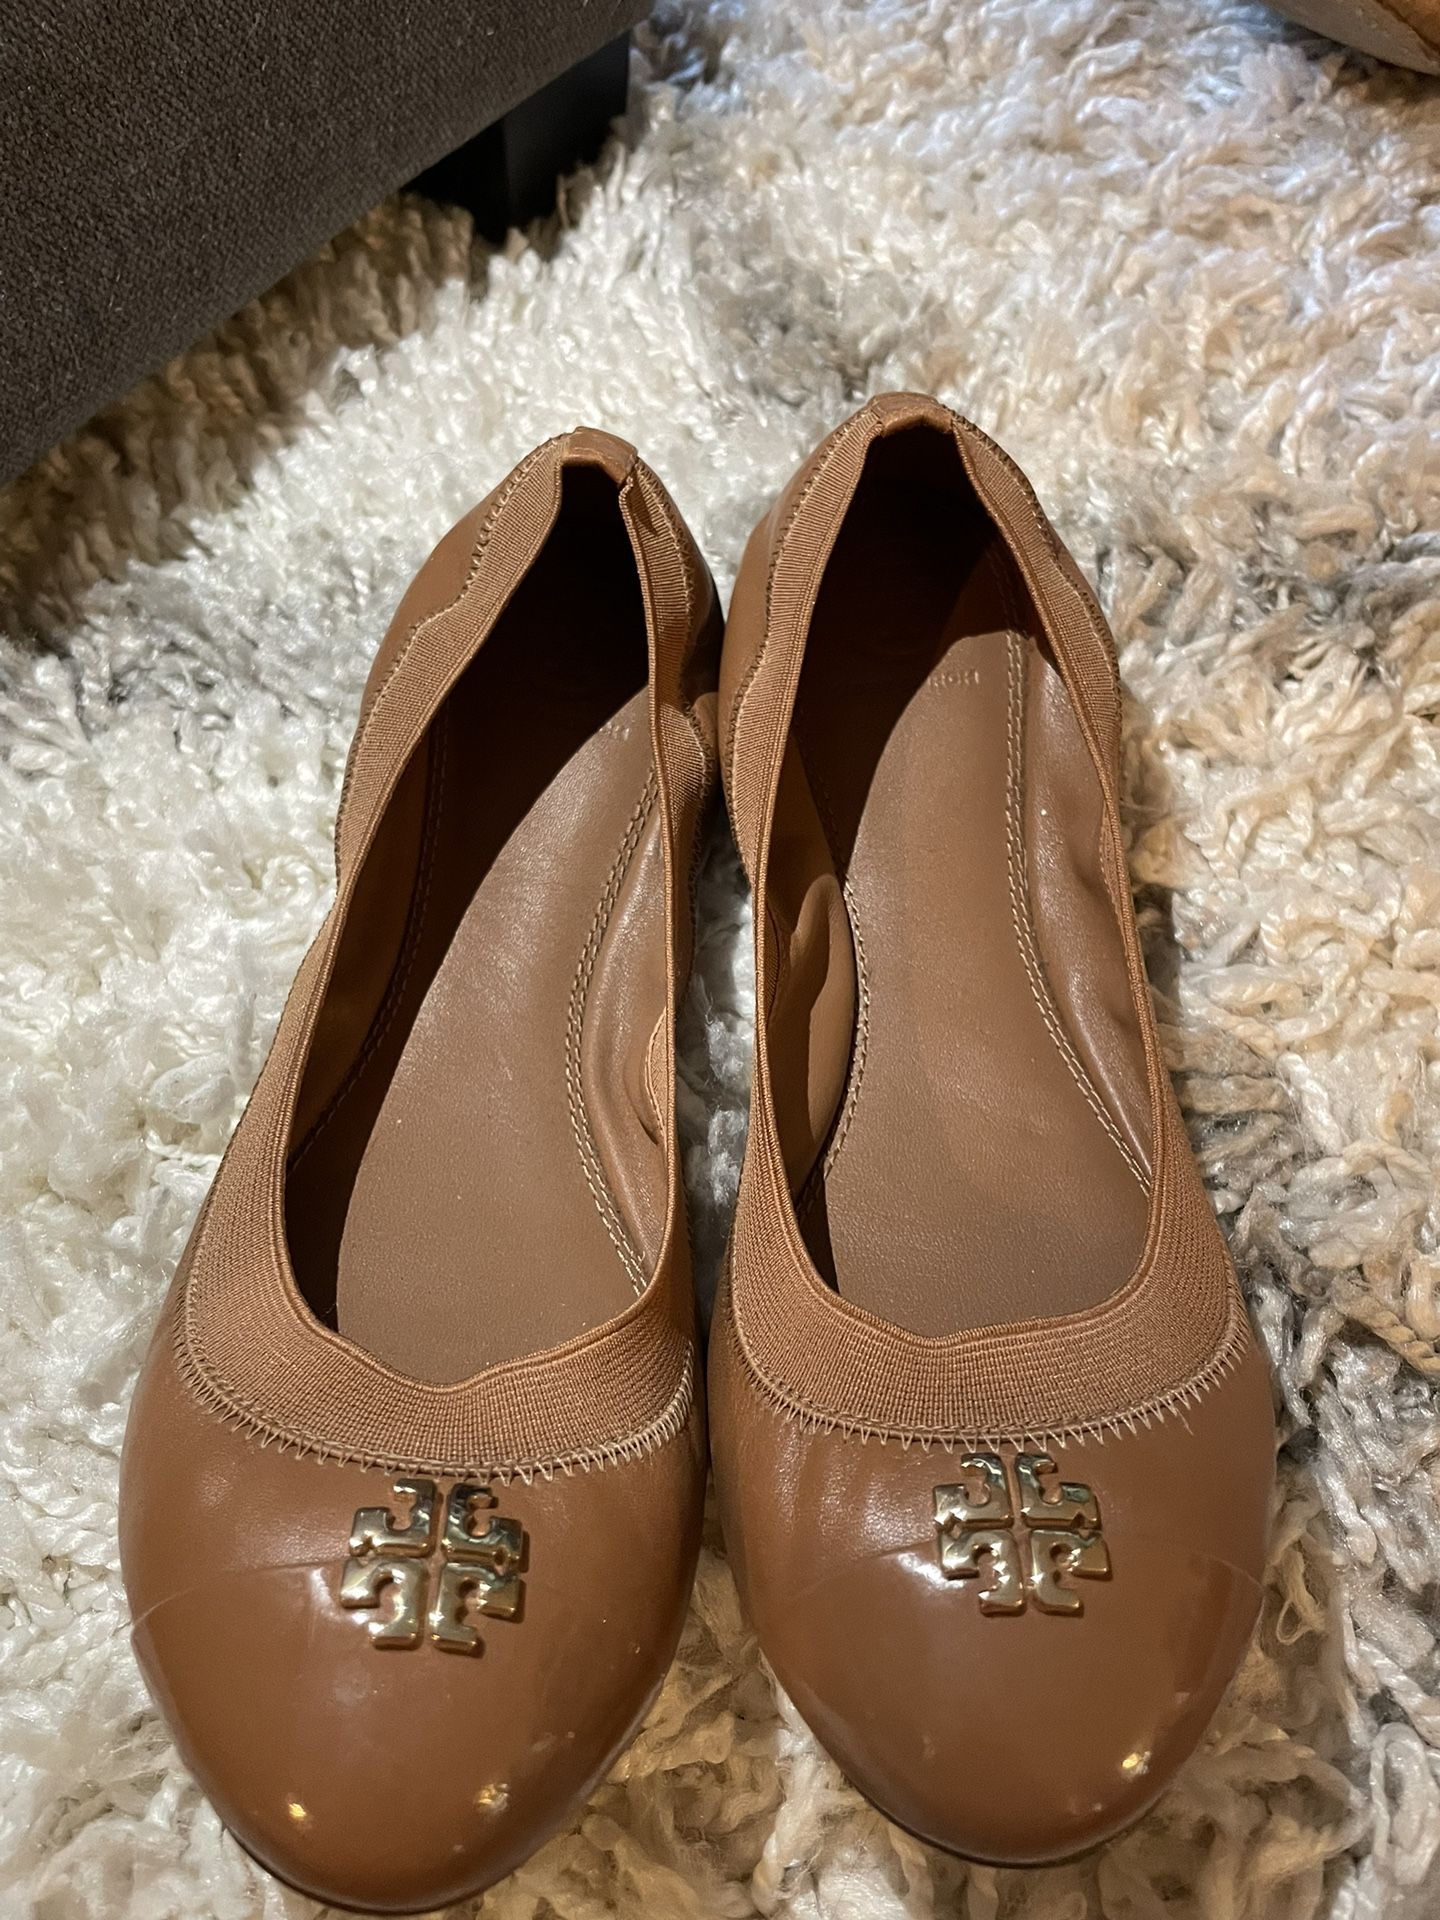 Tory Burch Flats for Sale in Rye, NY - OfferUp